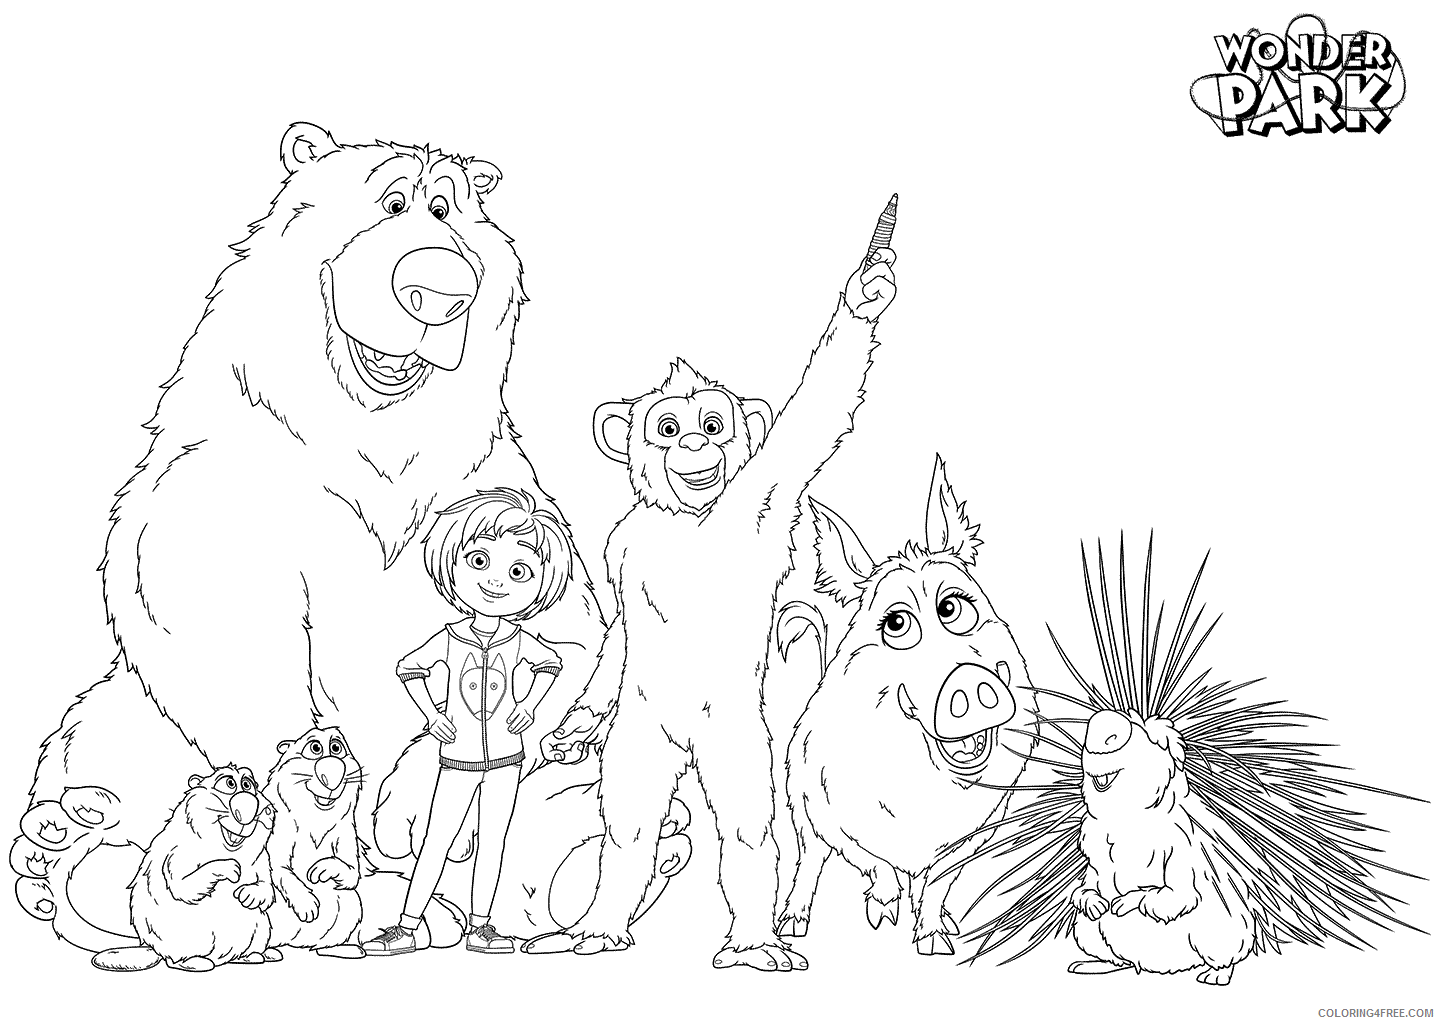 Wonder Park Coloring Pages TV Film characters park Printable 2020 11653 Coloring4free